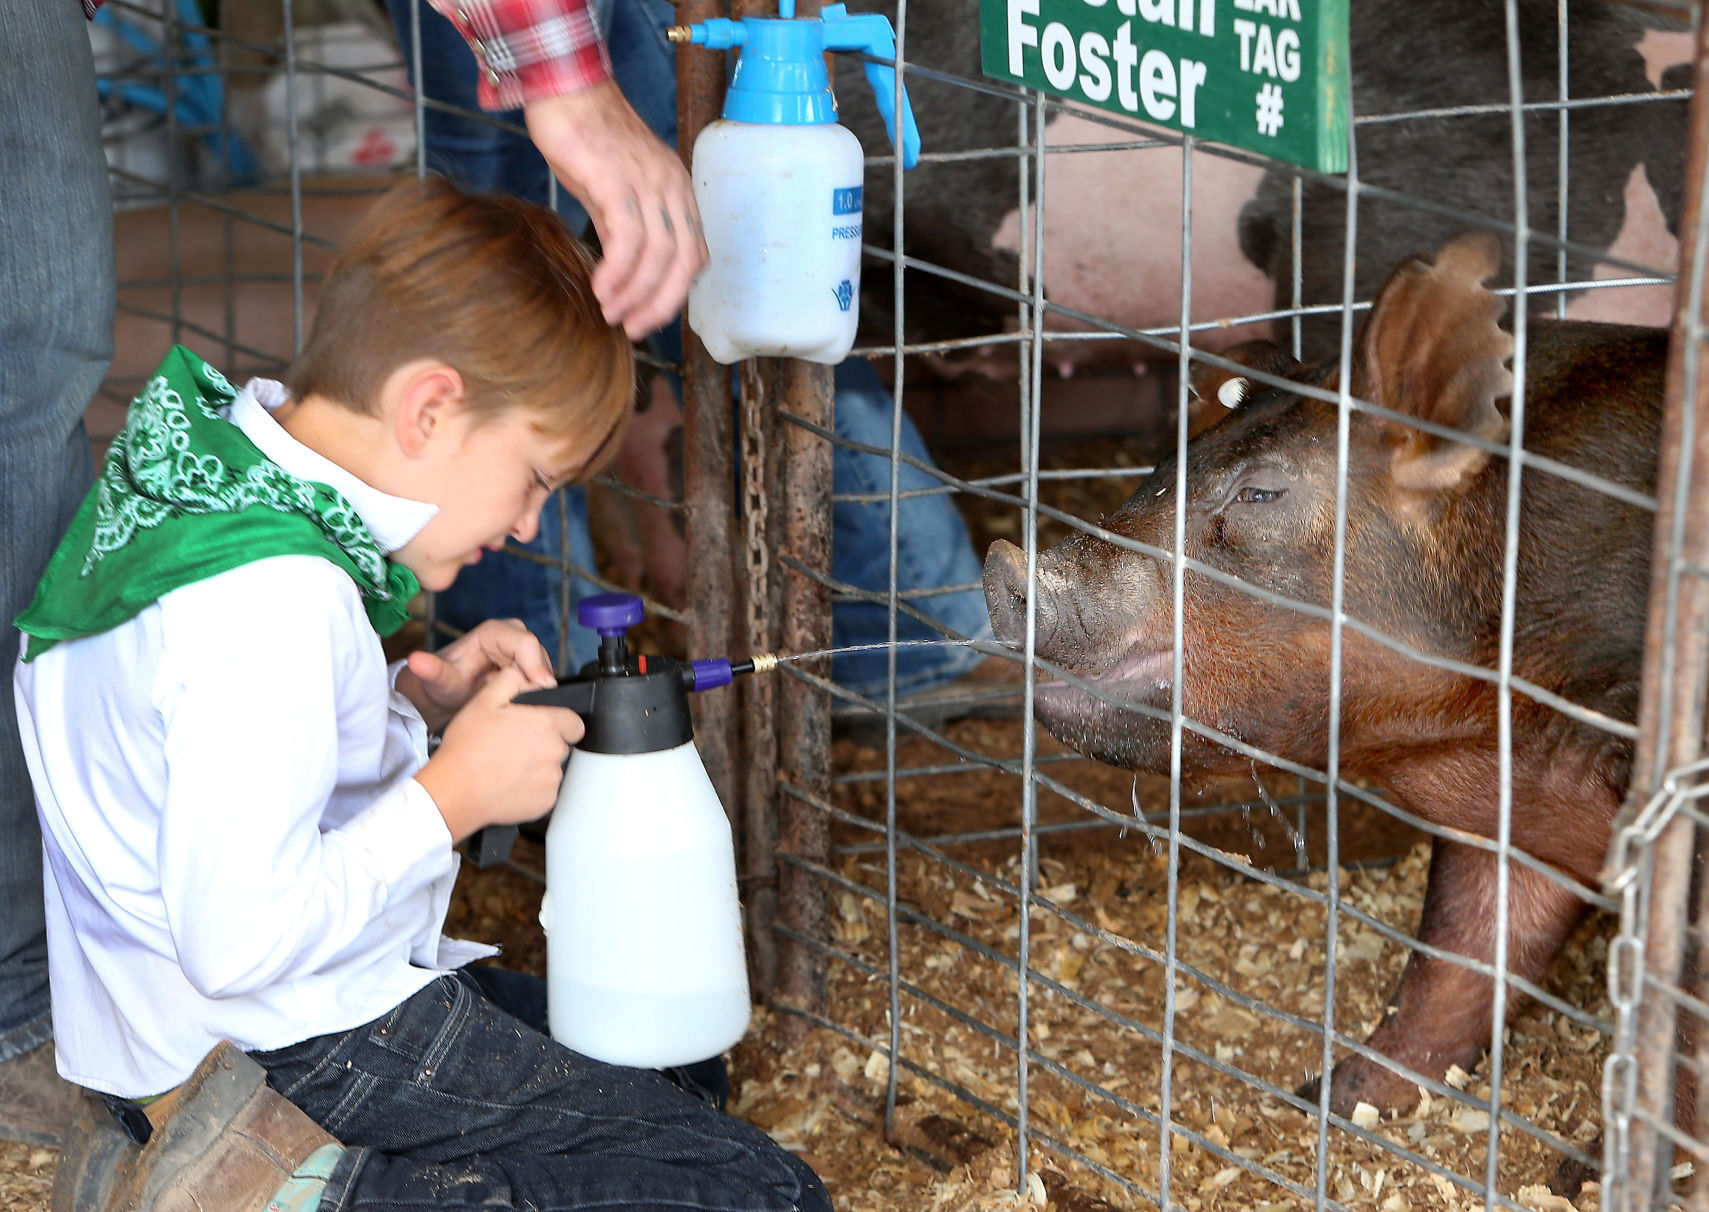 Visit to Pinal fair student exhibit shows 4-H is more than cows